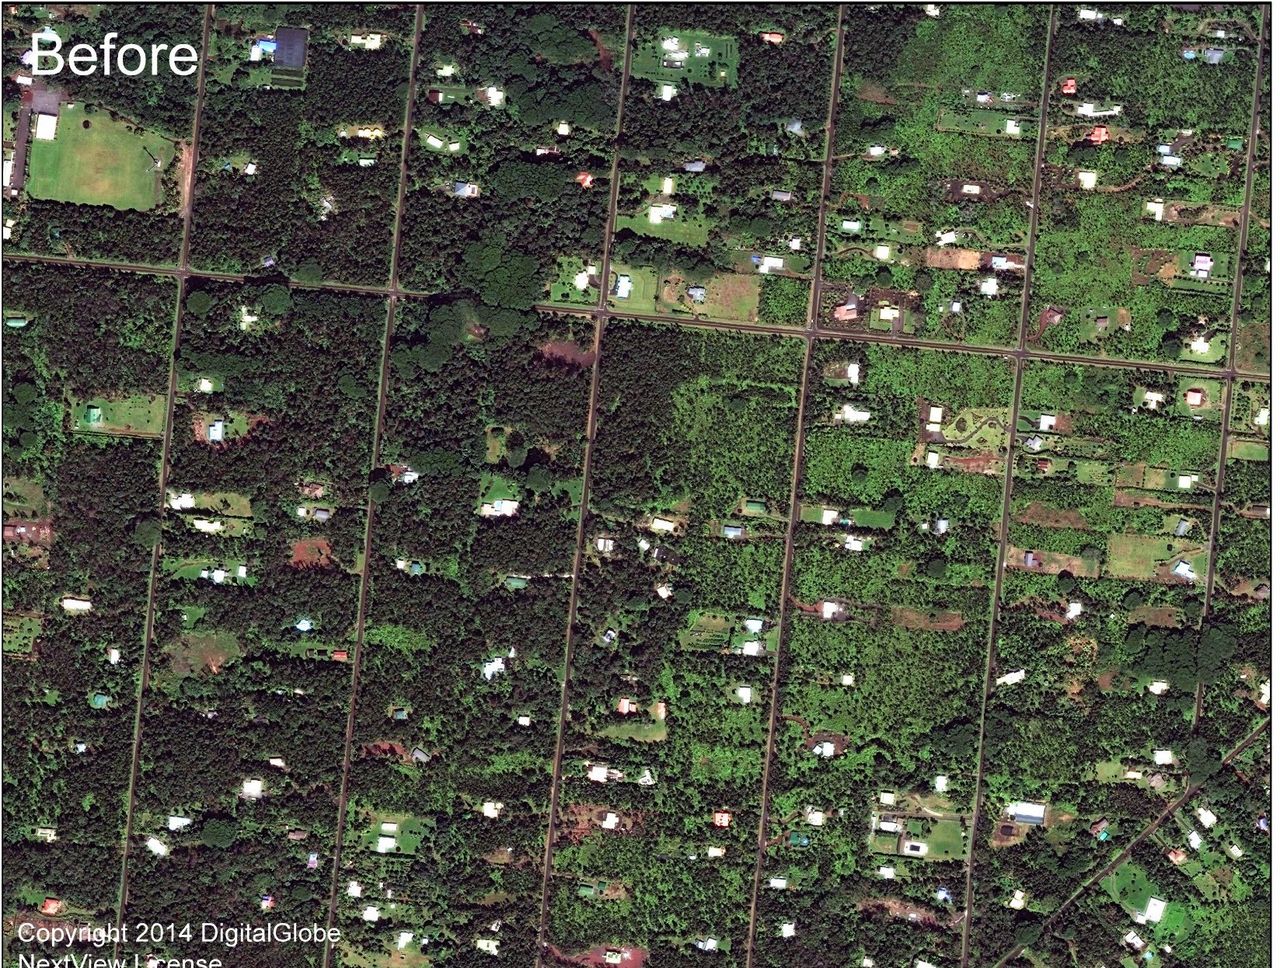 A close-up of the eastern part of Leilani Estates before the eruption.